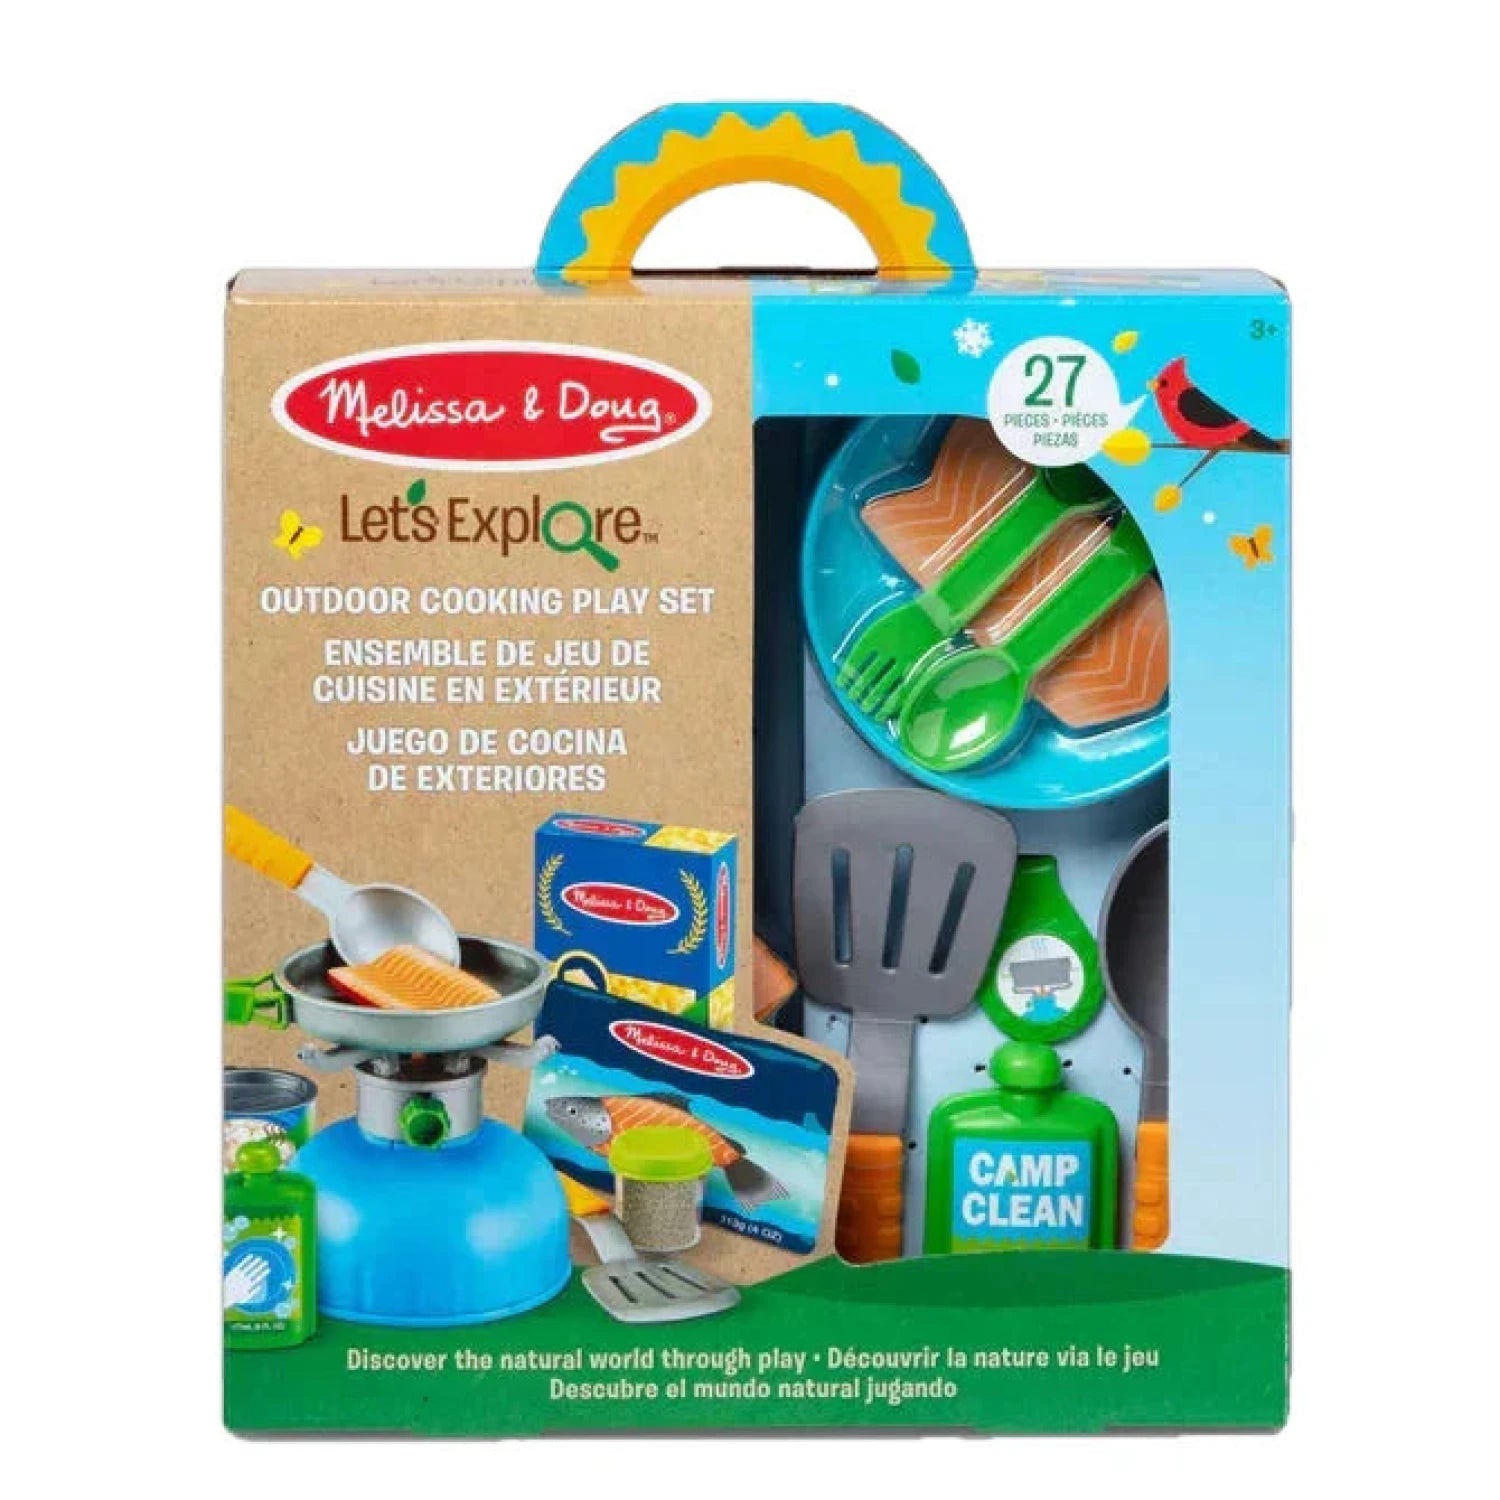 Melissa & Doug Let's Explore Outdoor Cooking Play Set, view of the front of the box